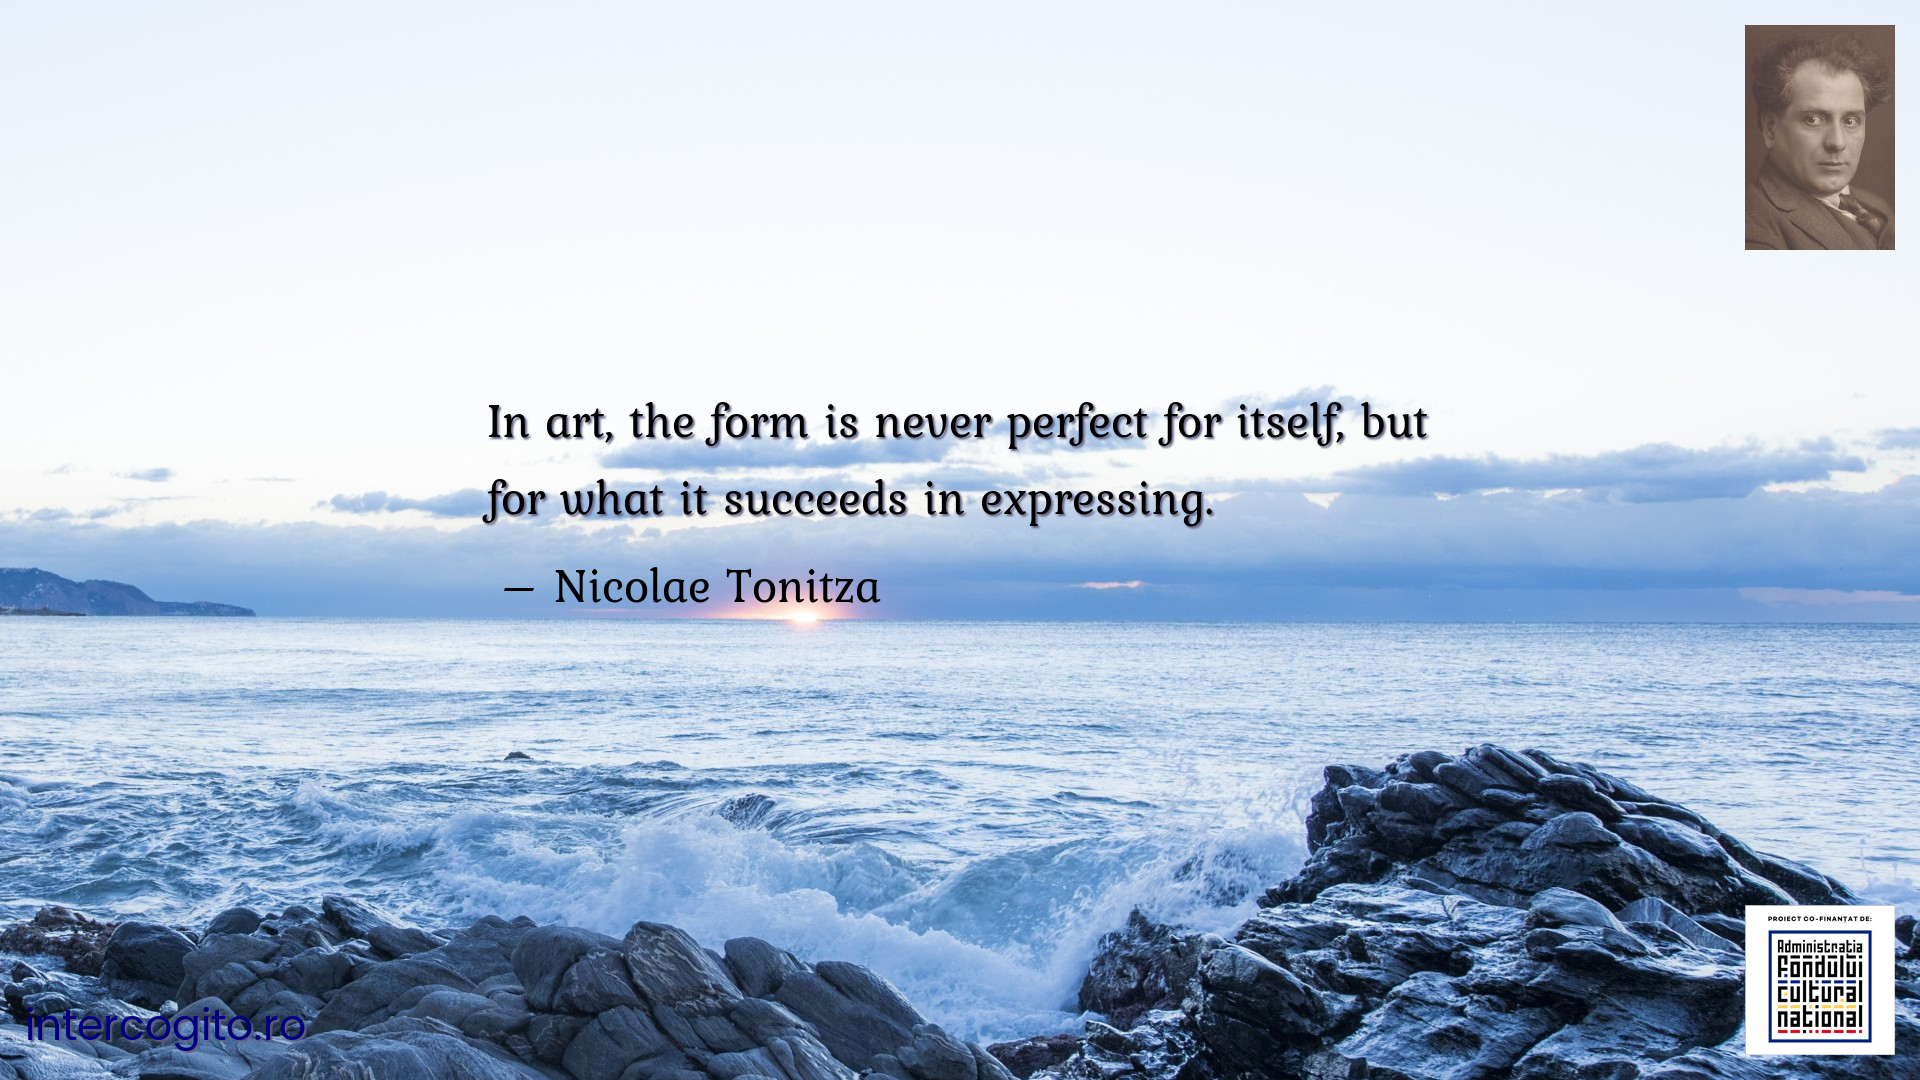 In art, the form is never perfect for itself, but for what it succeeds in expressing.